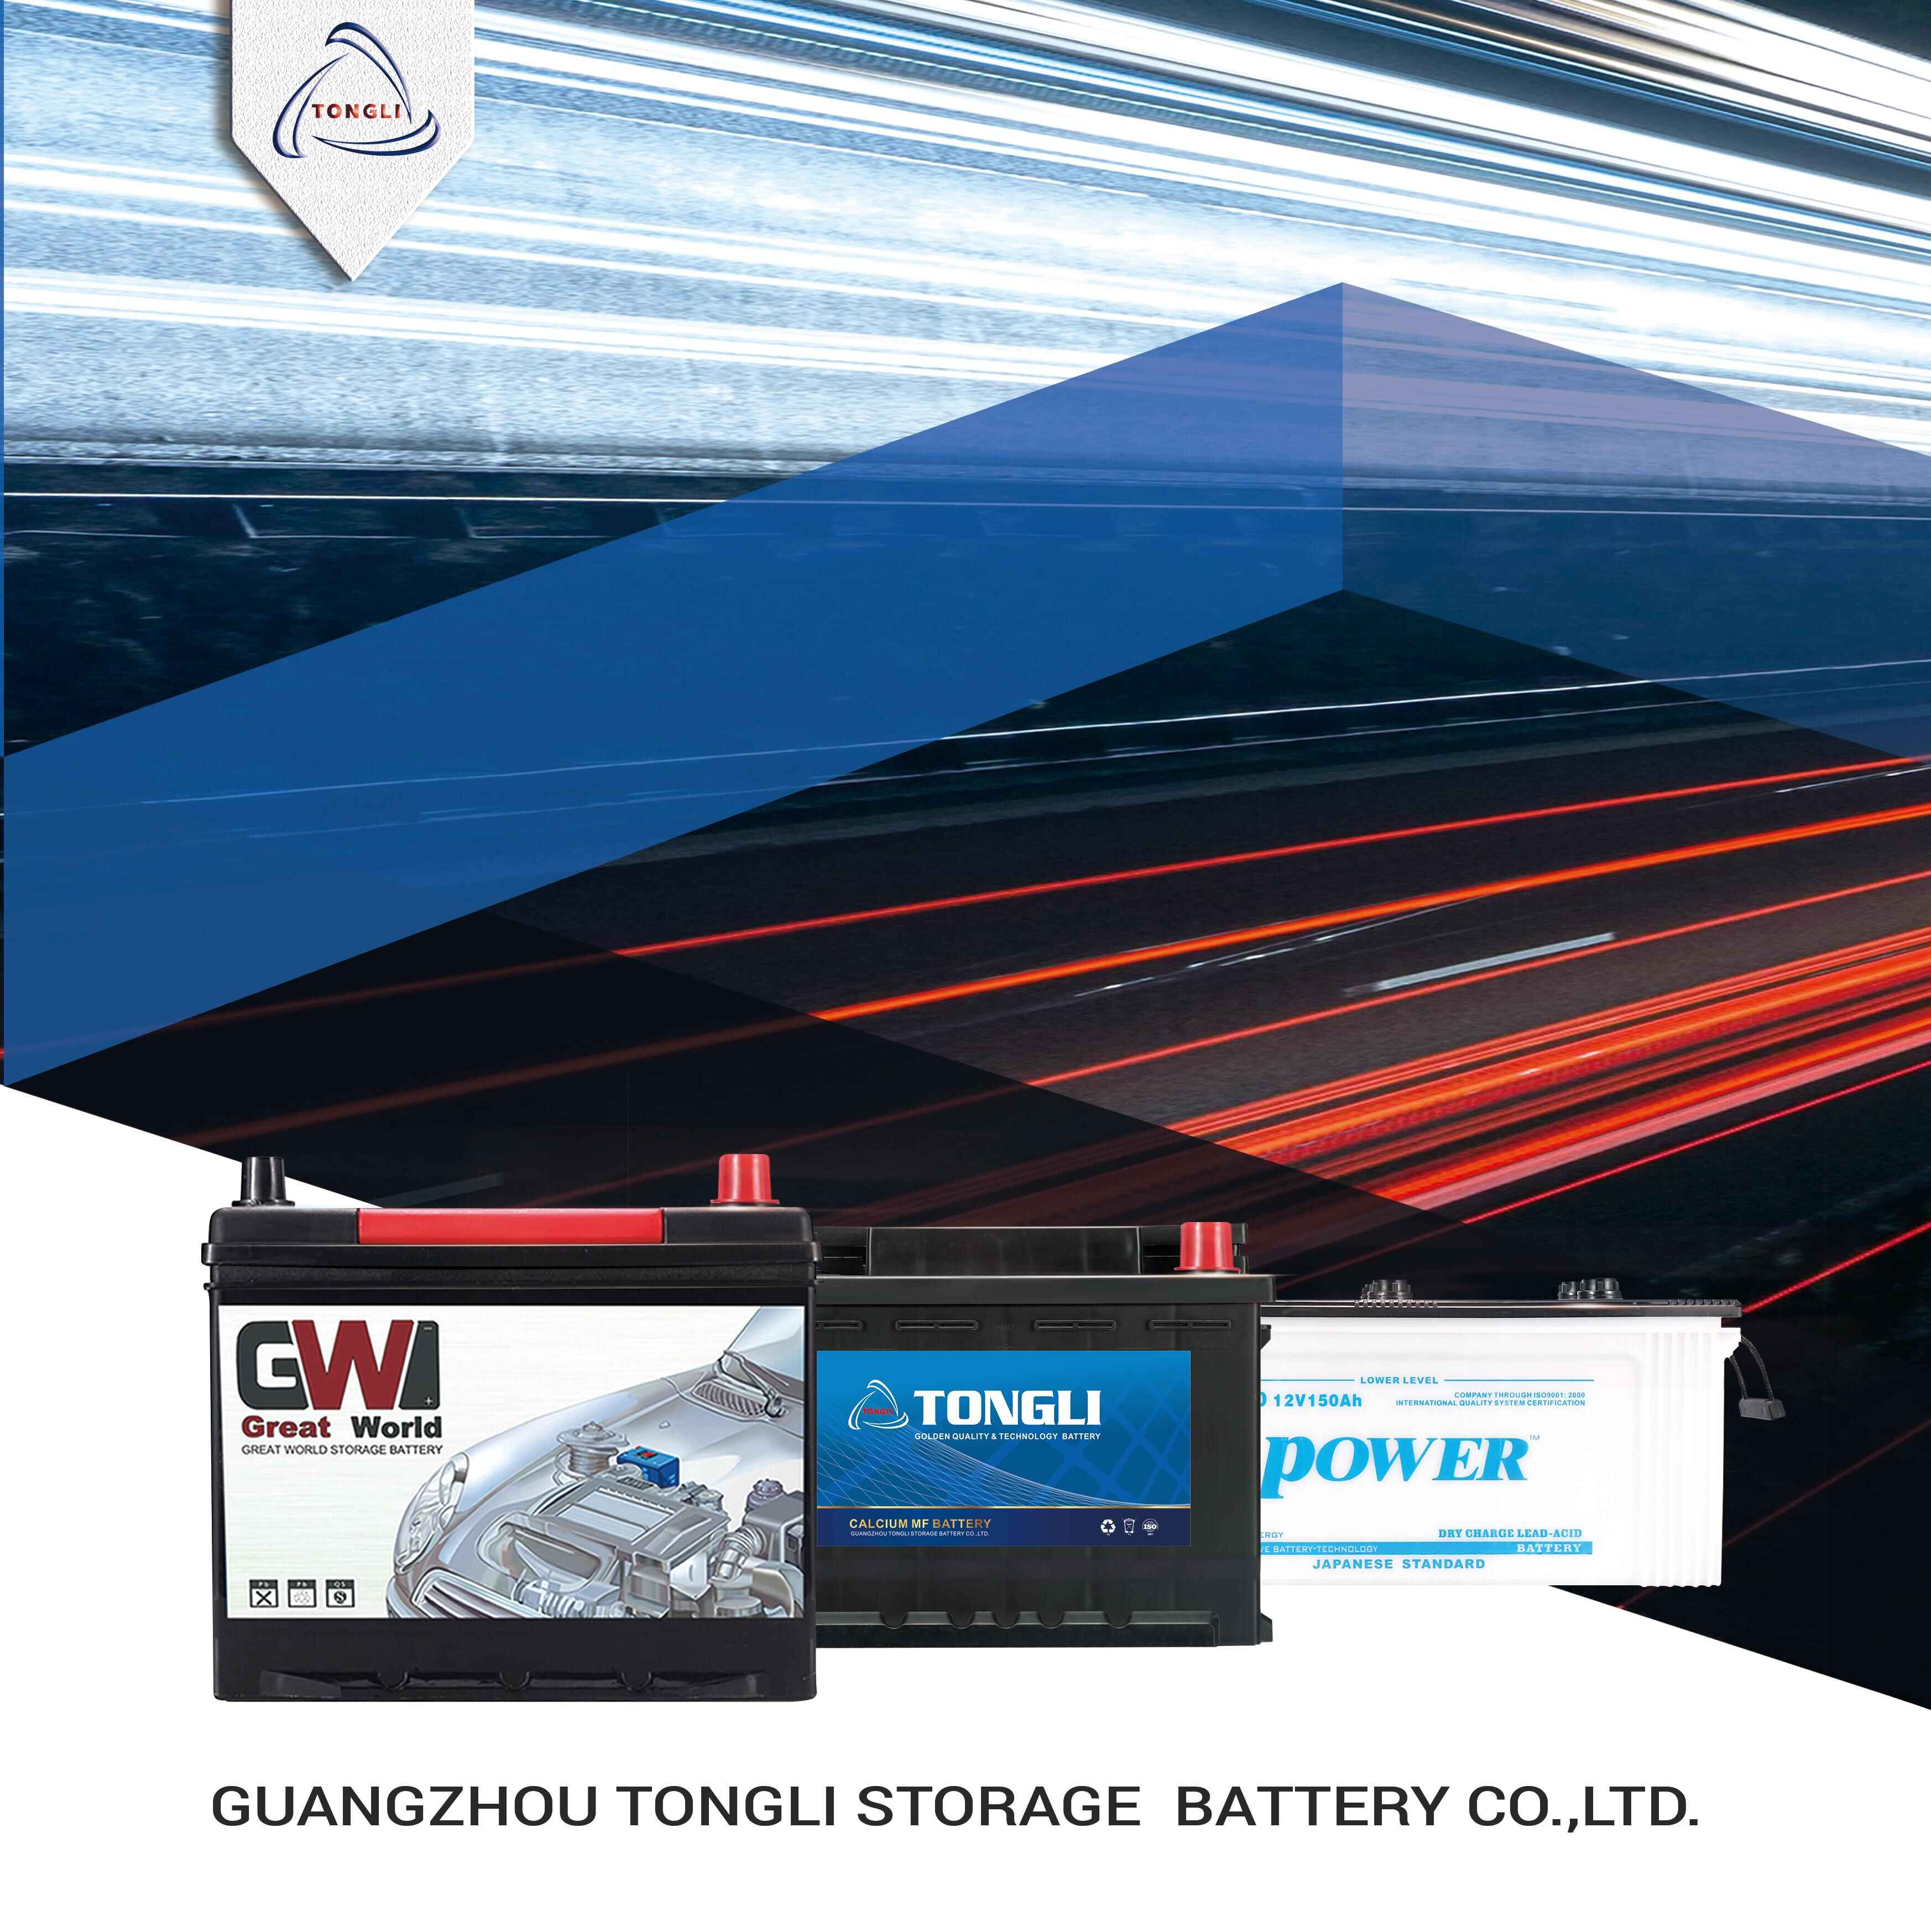 POWER Brand Car Battery 12V 80Ah Dry Charged Battery